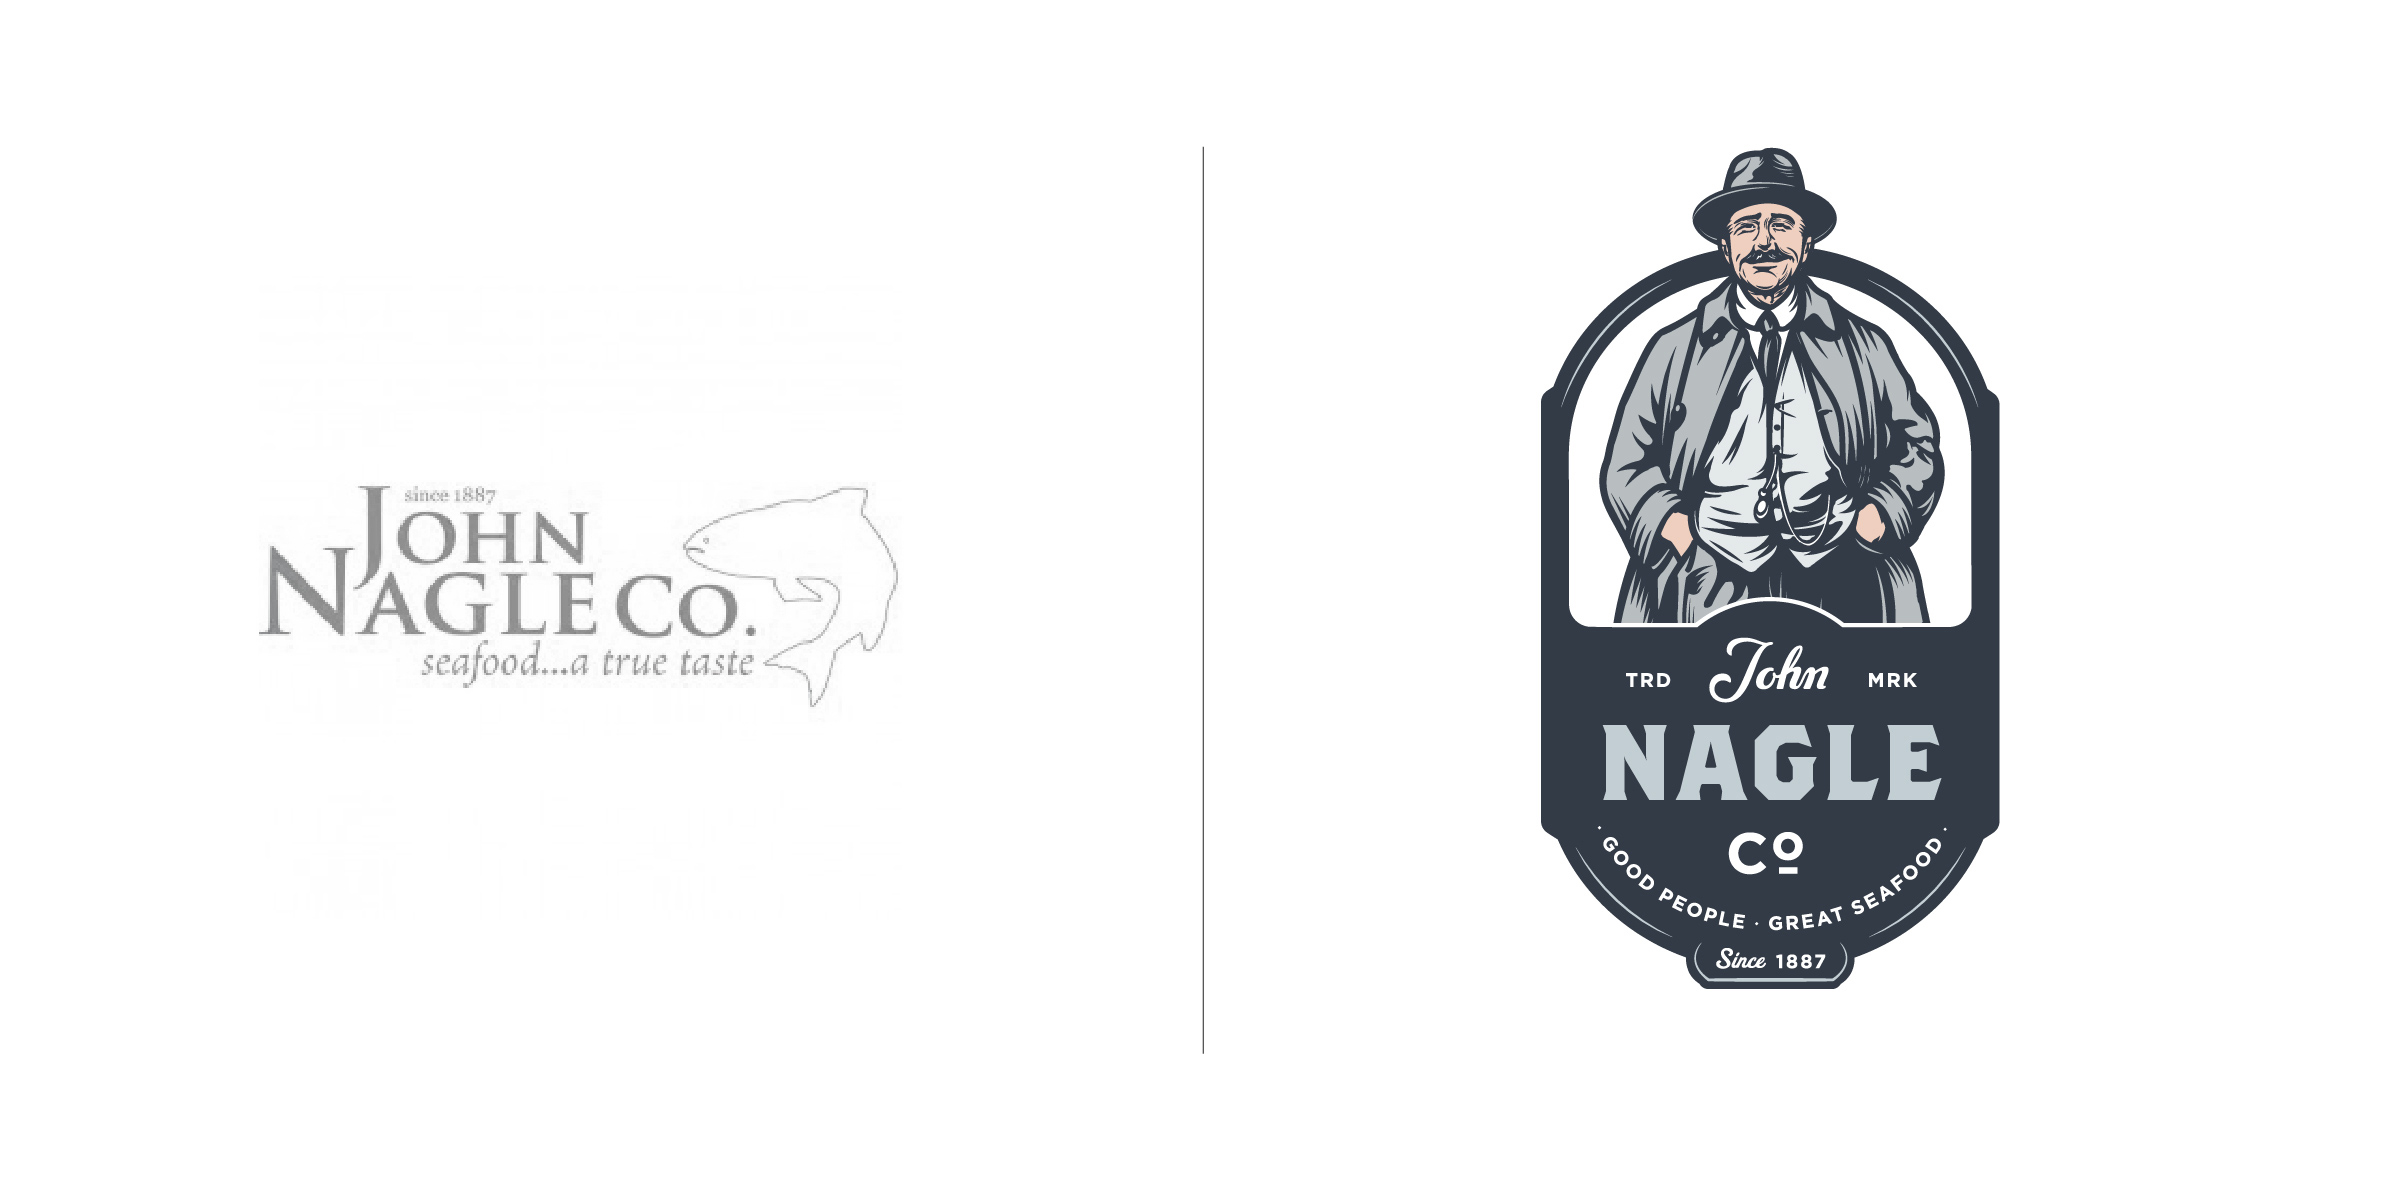  The client —   John Nagle Co. is a Boston based seafood distribution business founded in 1887  The goal — It is crucial for companies in ever changing industries to keep their logos current (and not solely rely on an impressive company history). Our